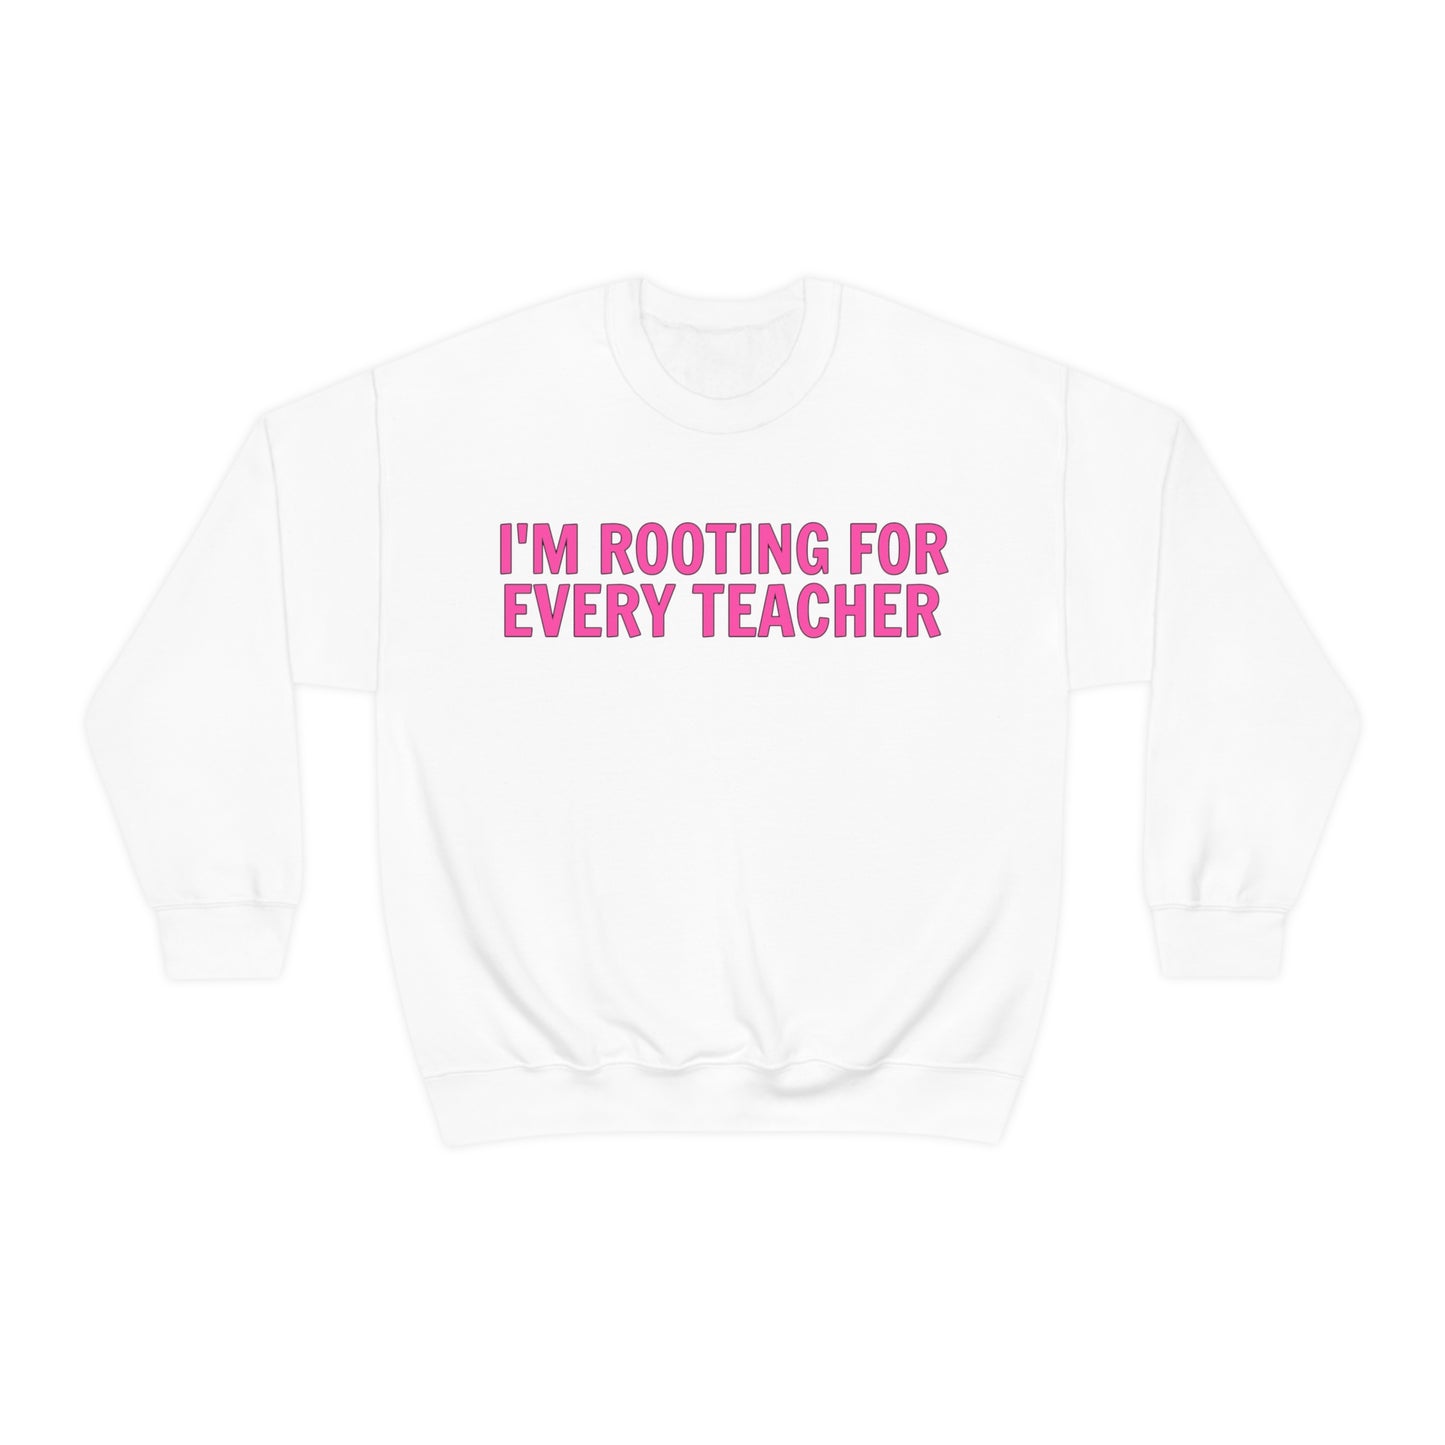 I'm Rooting for Every Teacher Crewneck